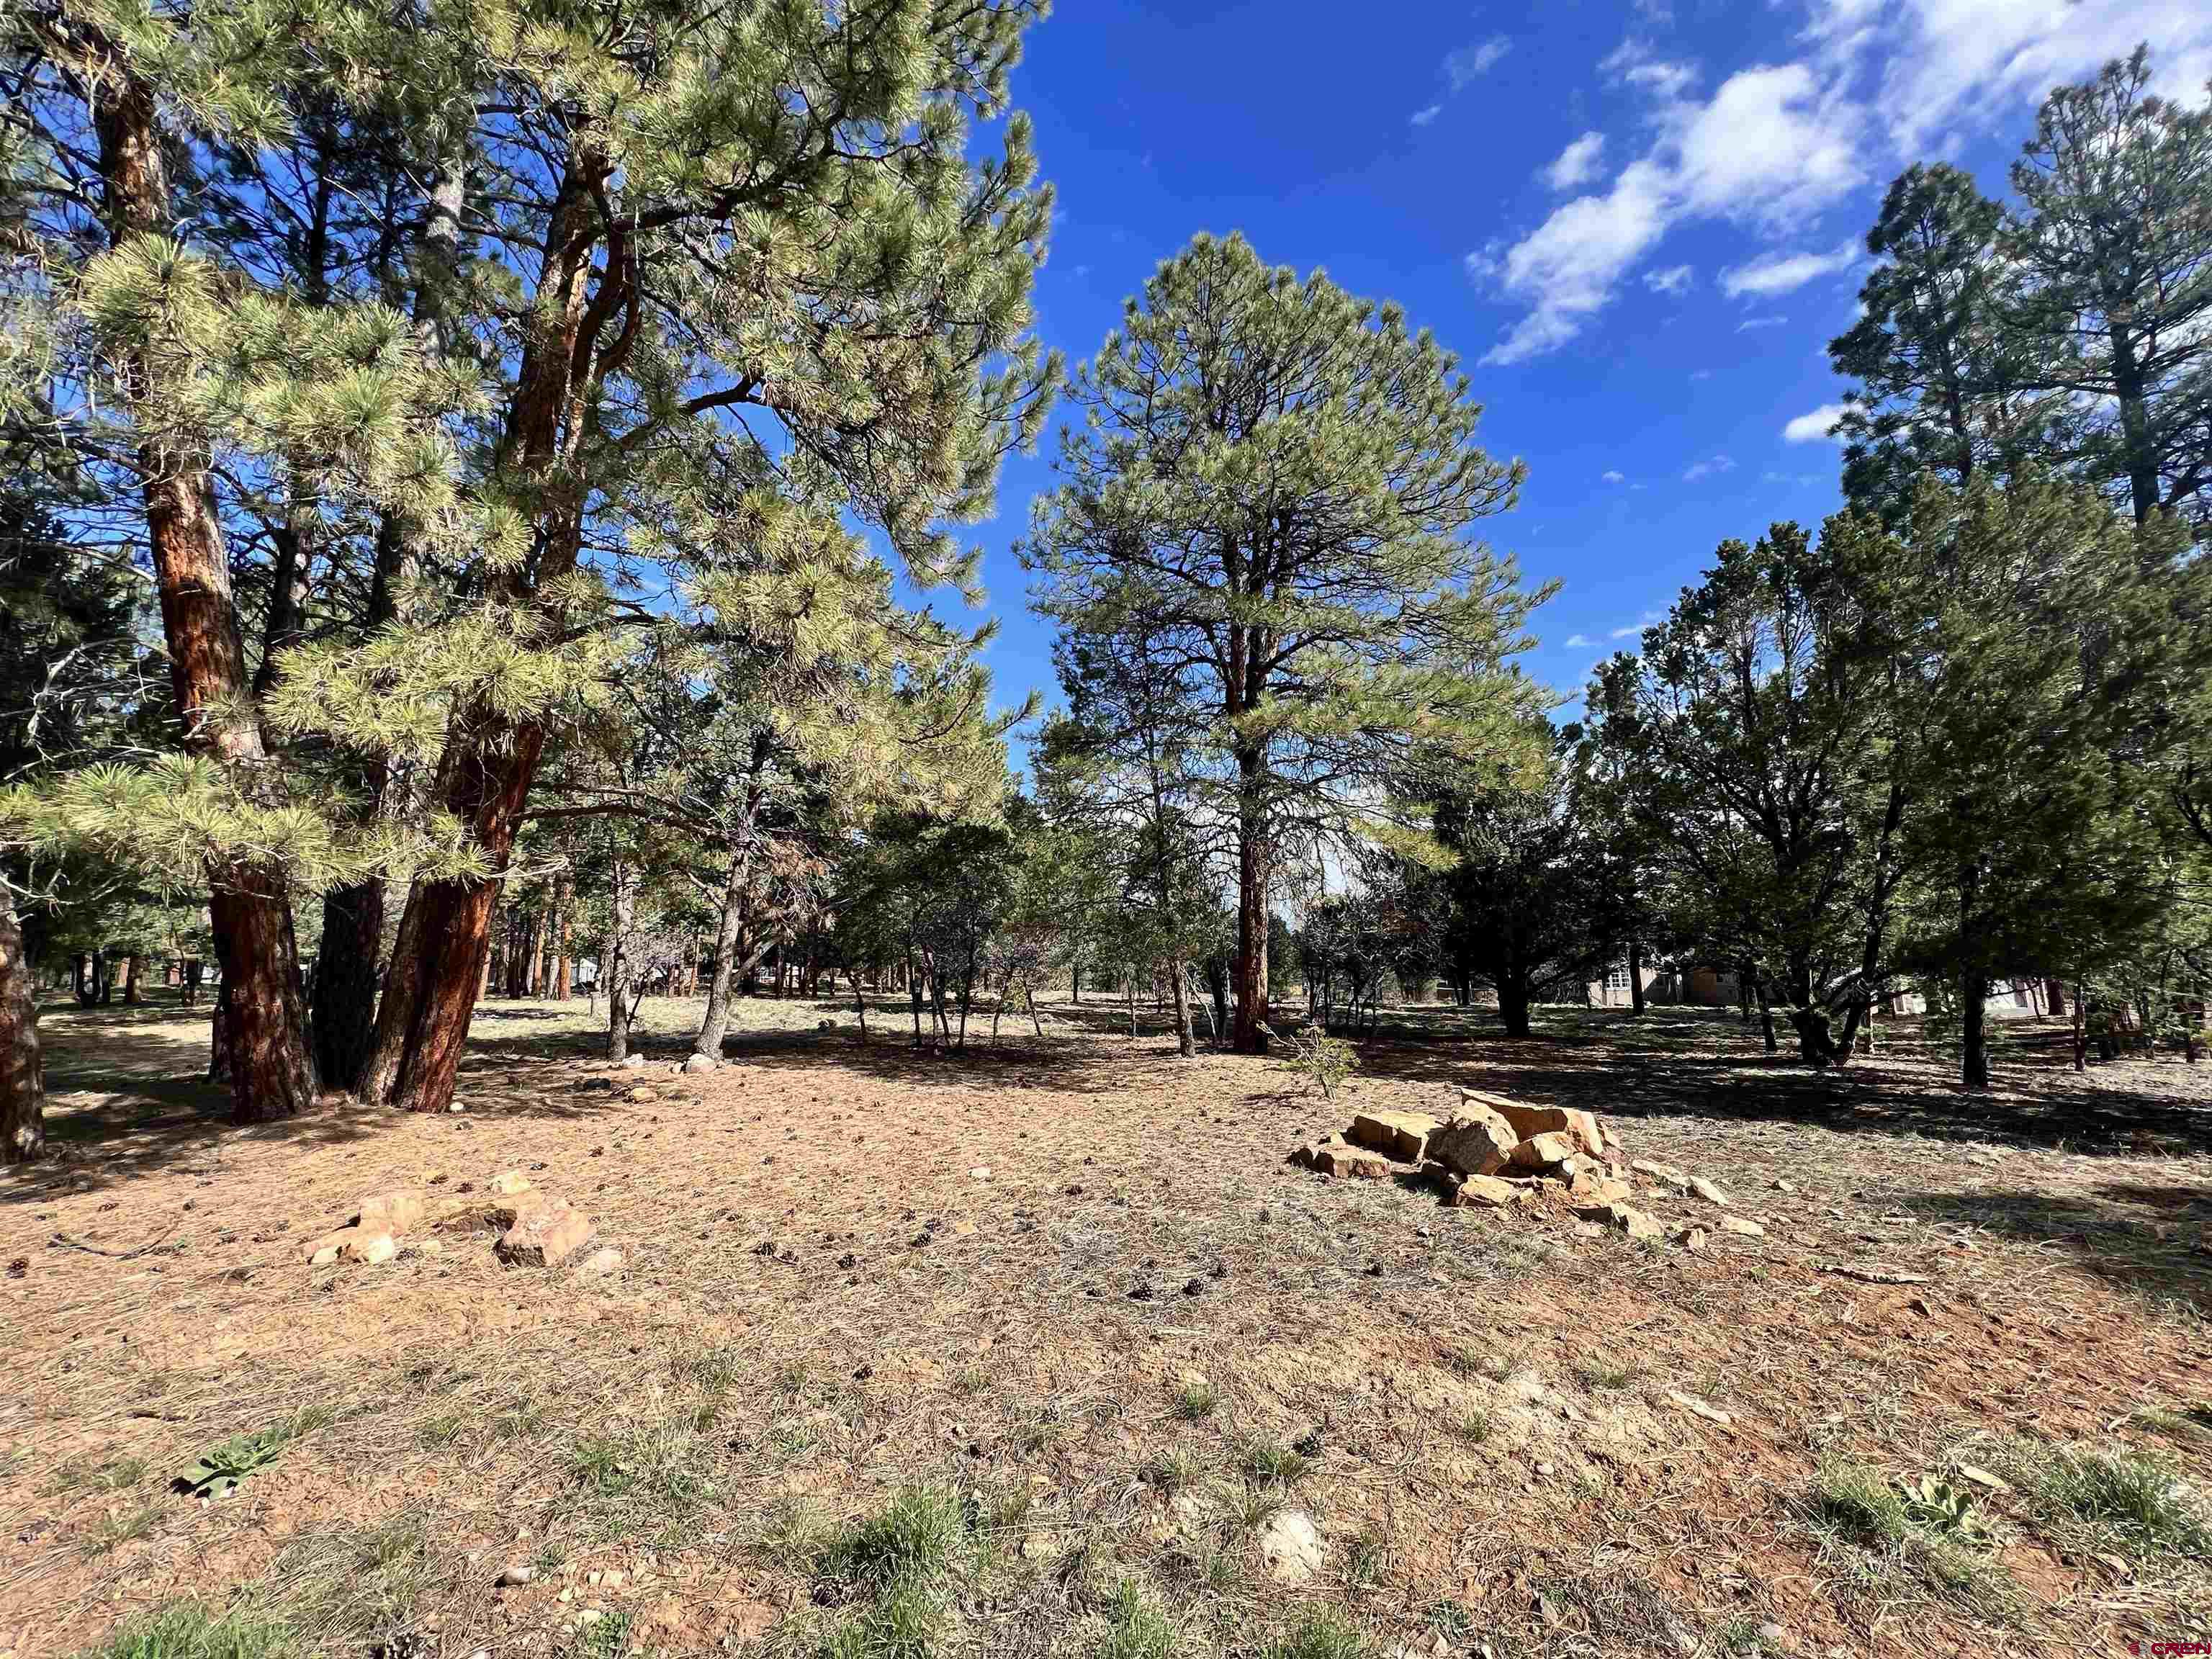 Build your dream home on this stunning vacant lot in the Divide Ranch and Club golf community. With mature ponderosa pines dotting the landscape and semi-obstructed views of the San Juan Mountains, this property offers the perfect balance of privacy and natural beauty. Whether you are an avid golfer or simply enjoy being surrounded by wildlife and nature, this lot is sure to exceed your expectations.   Located just minutes from the first tee box and 45 minutes from world-class skiing in Telluride, this lot is situated in an idyllic setting for outdoor enthusiasts. With hiking, biking, climbing, fishing and breathtaking scenery at your fingertips, this location has it all.  Don't miss this opportunity to build your next spacious and luxurious retreat in one of the most picturesque locations in the region!